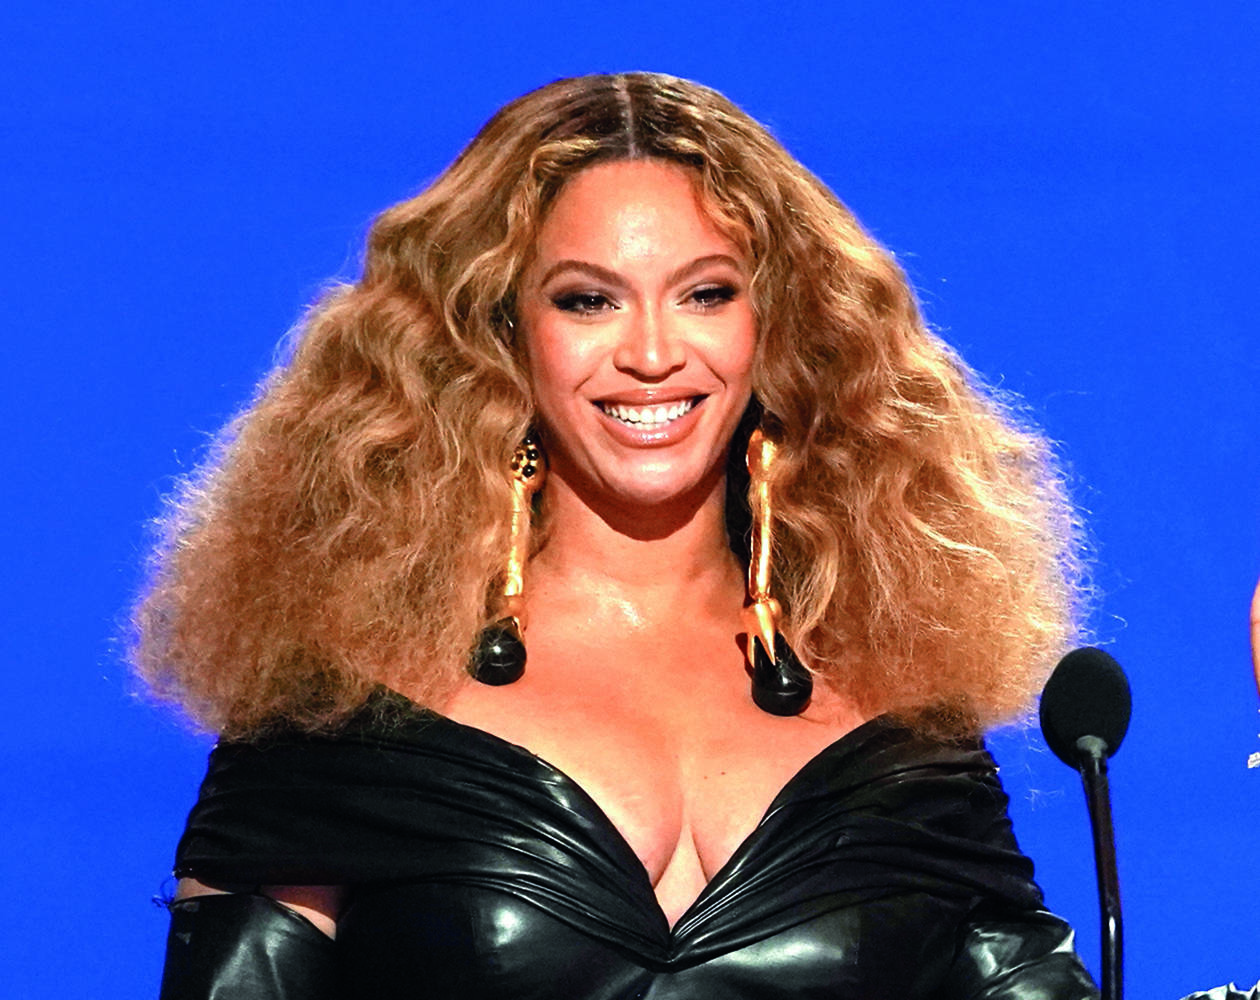 Dubai may pay Beyonce with $24 million for a show